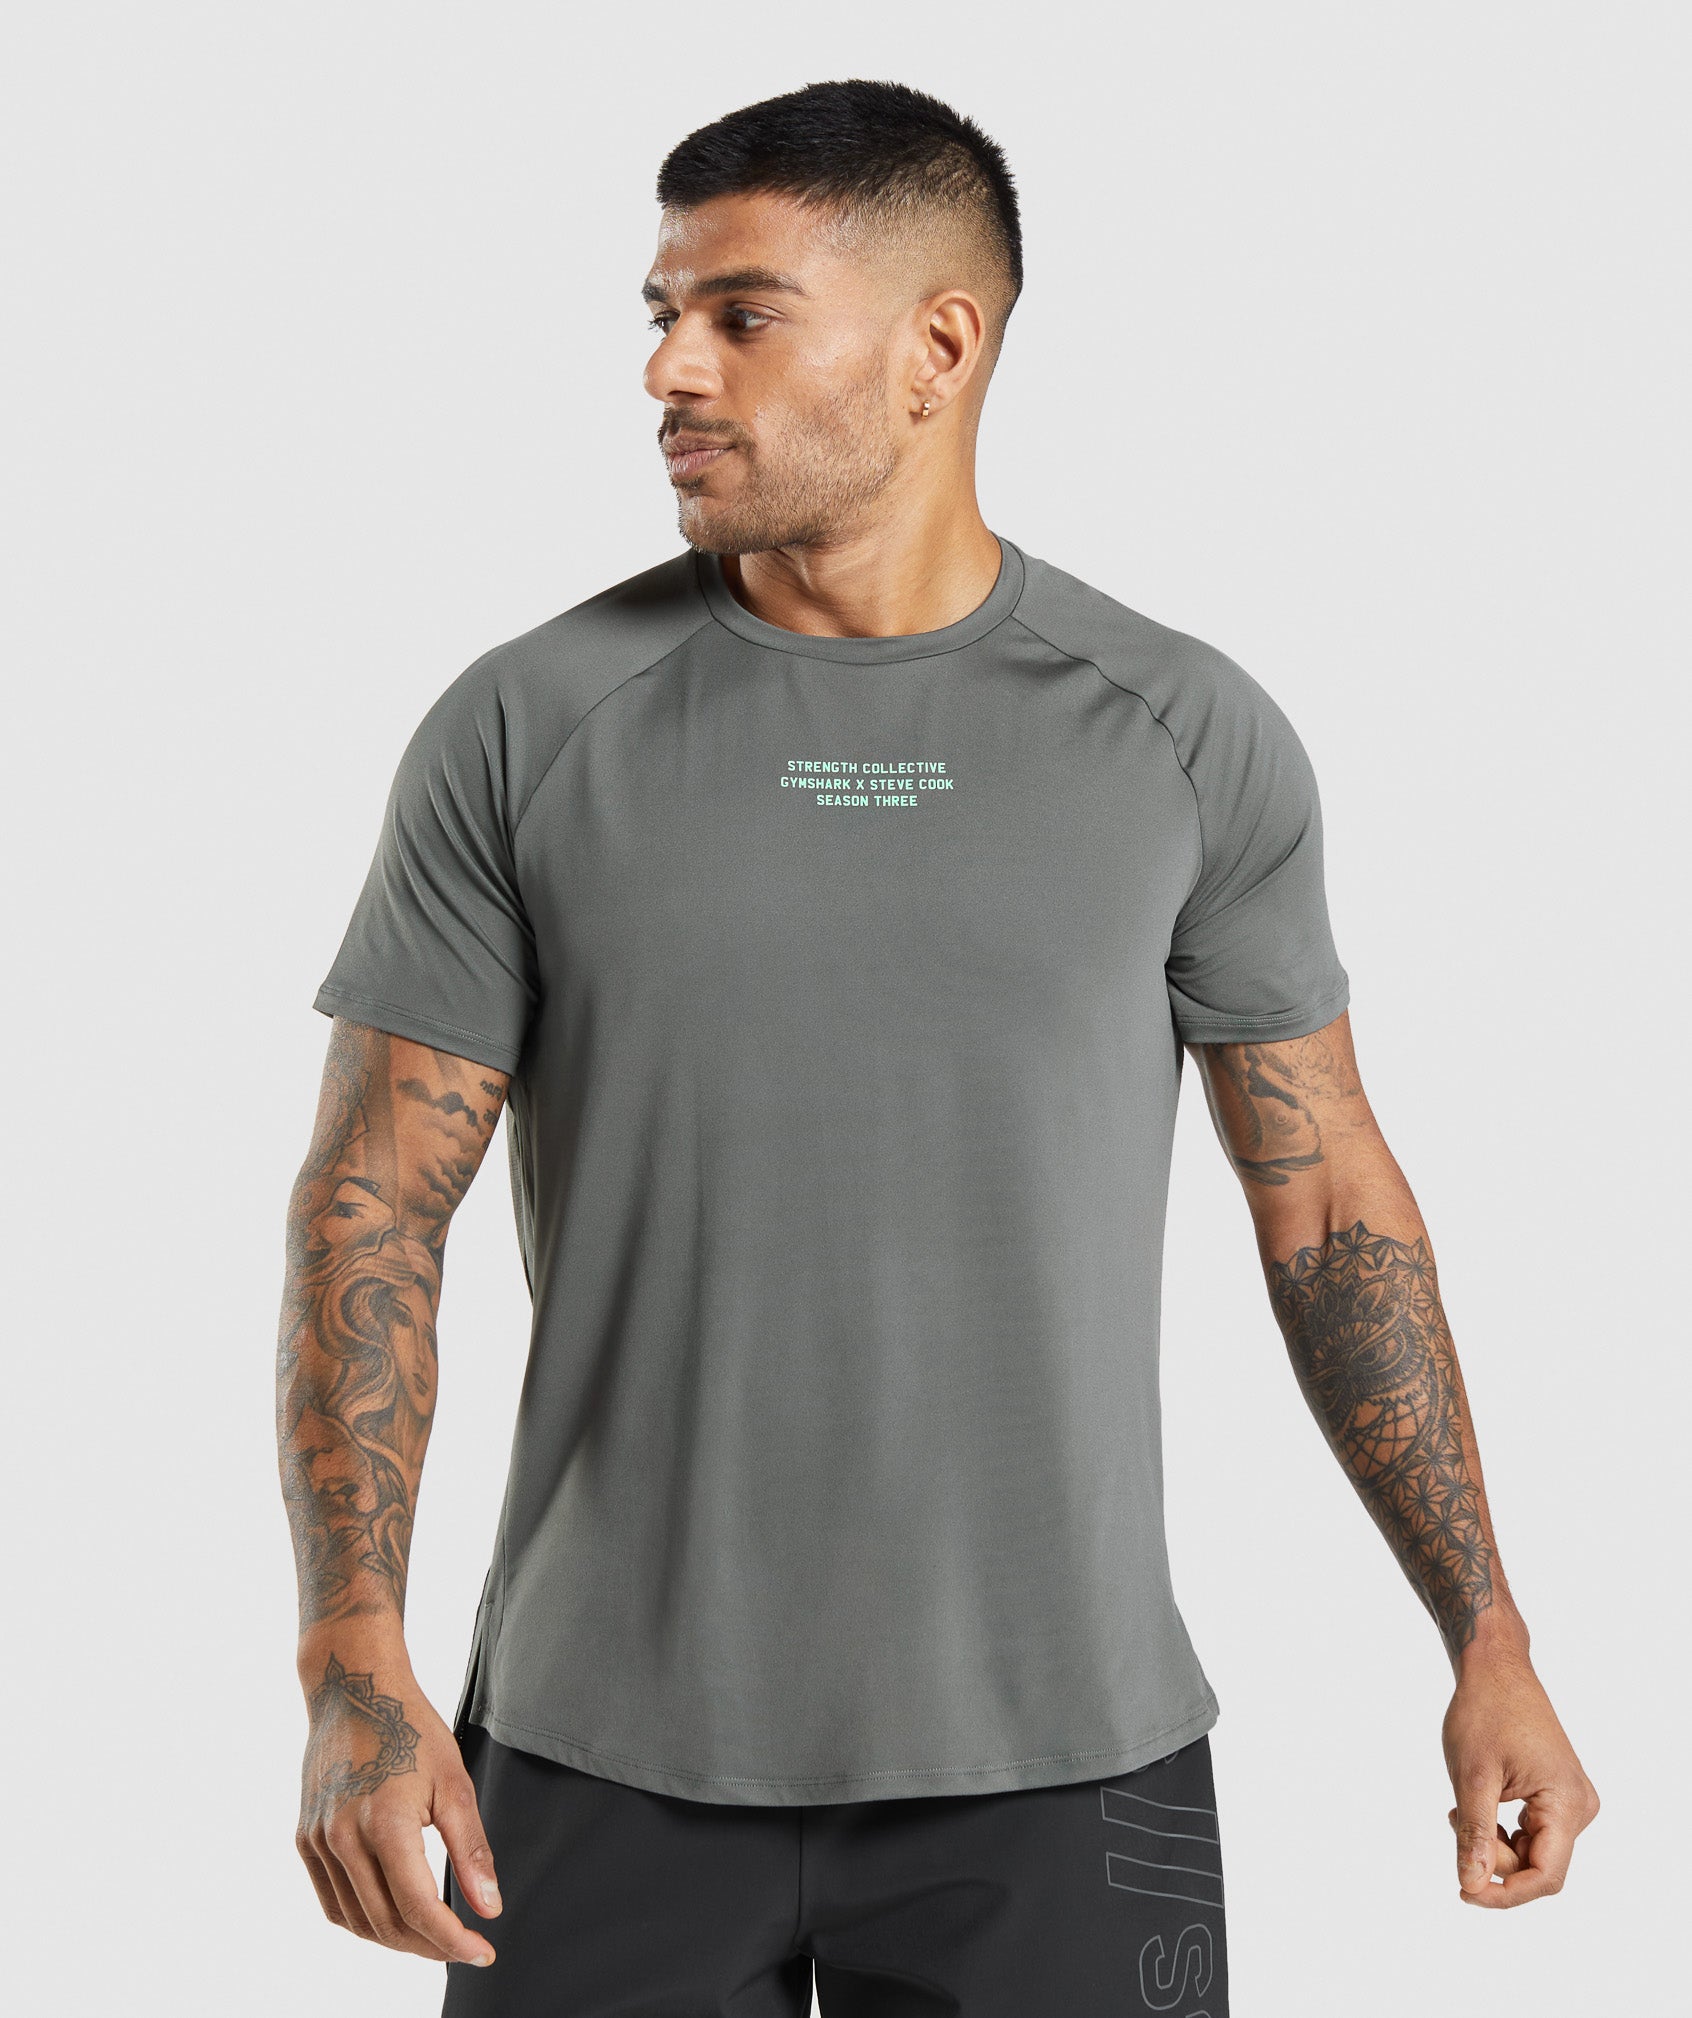 Gymshark//Steve Cook T-Shirt in Charcoal Grey - view 2